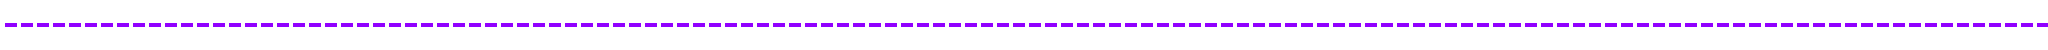 purple dotted line